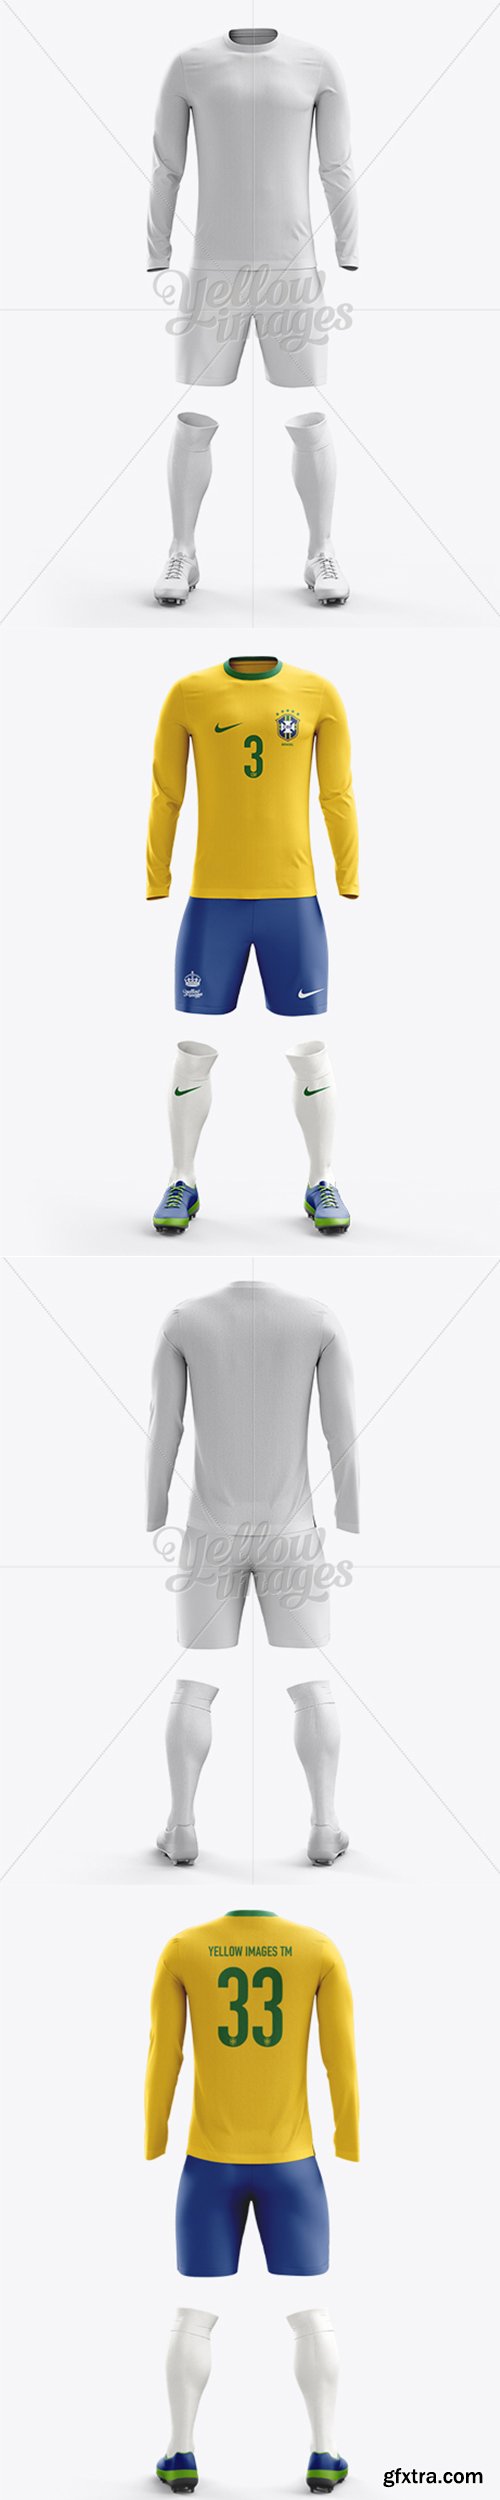 Soccer Kit with Long Sleeve Mockup / Front View 10675 and Back View 10677